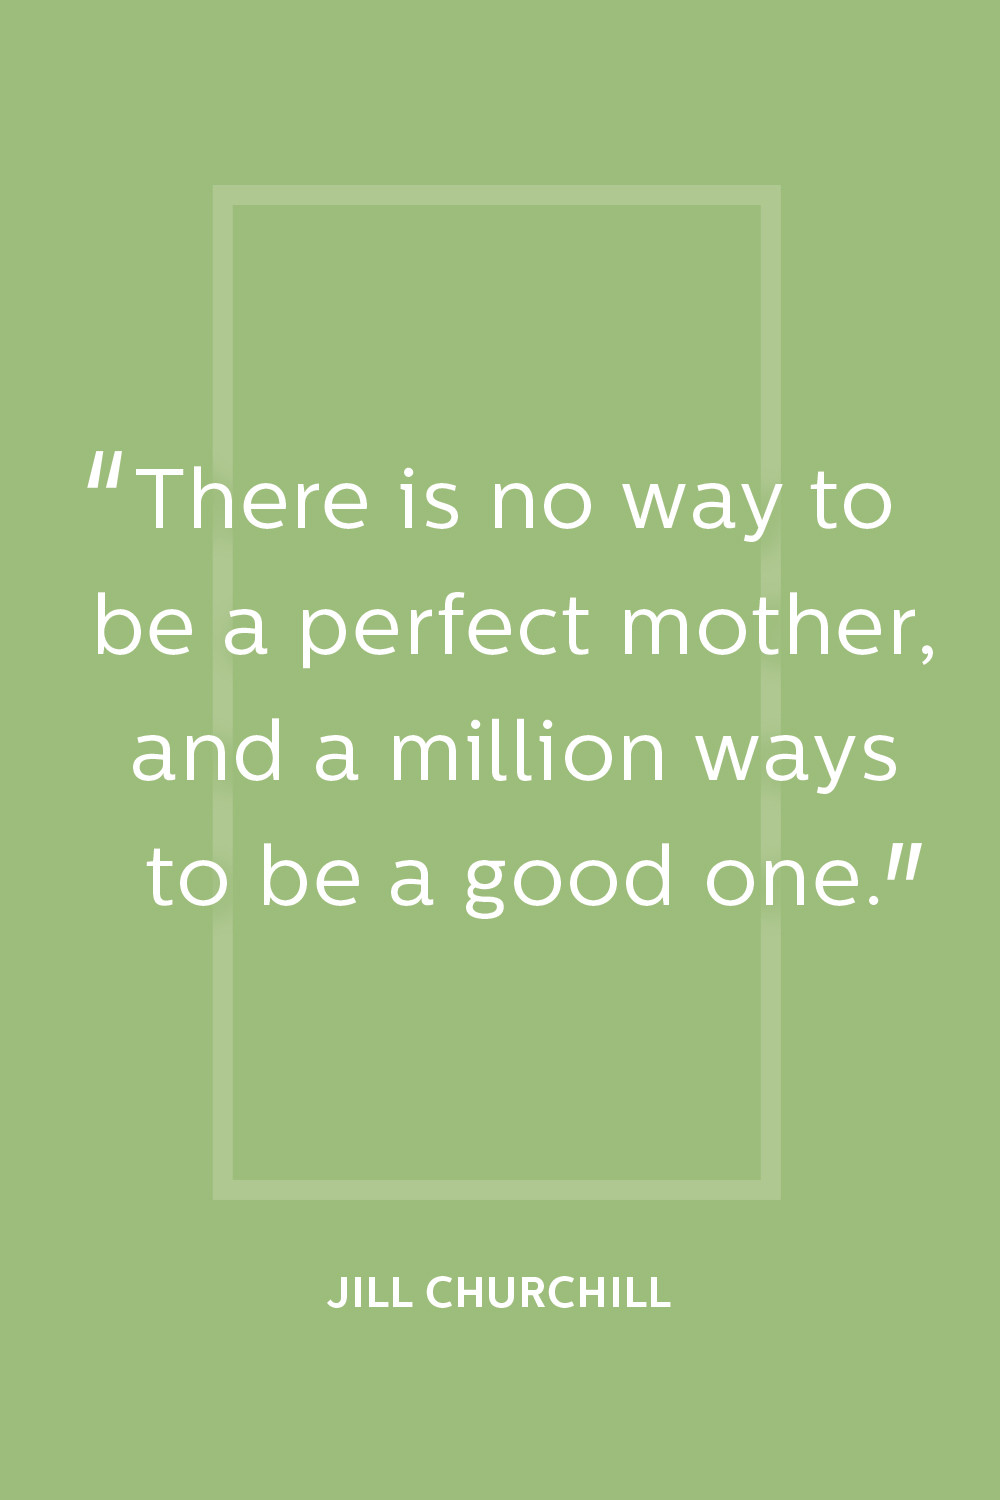 Famous Quotes About Mothers
 12 Famous Mother s Day Quotes Best Quotes About Moms